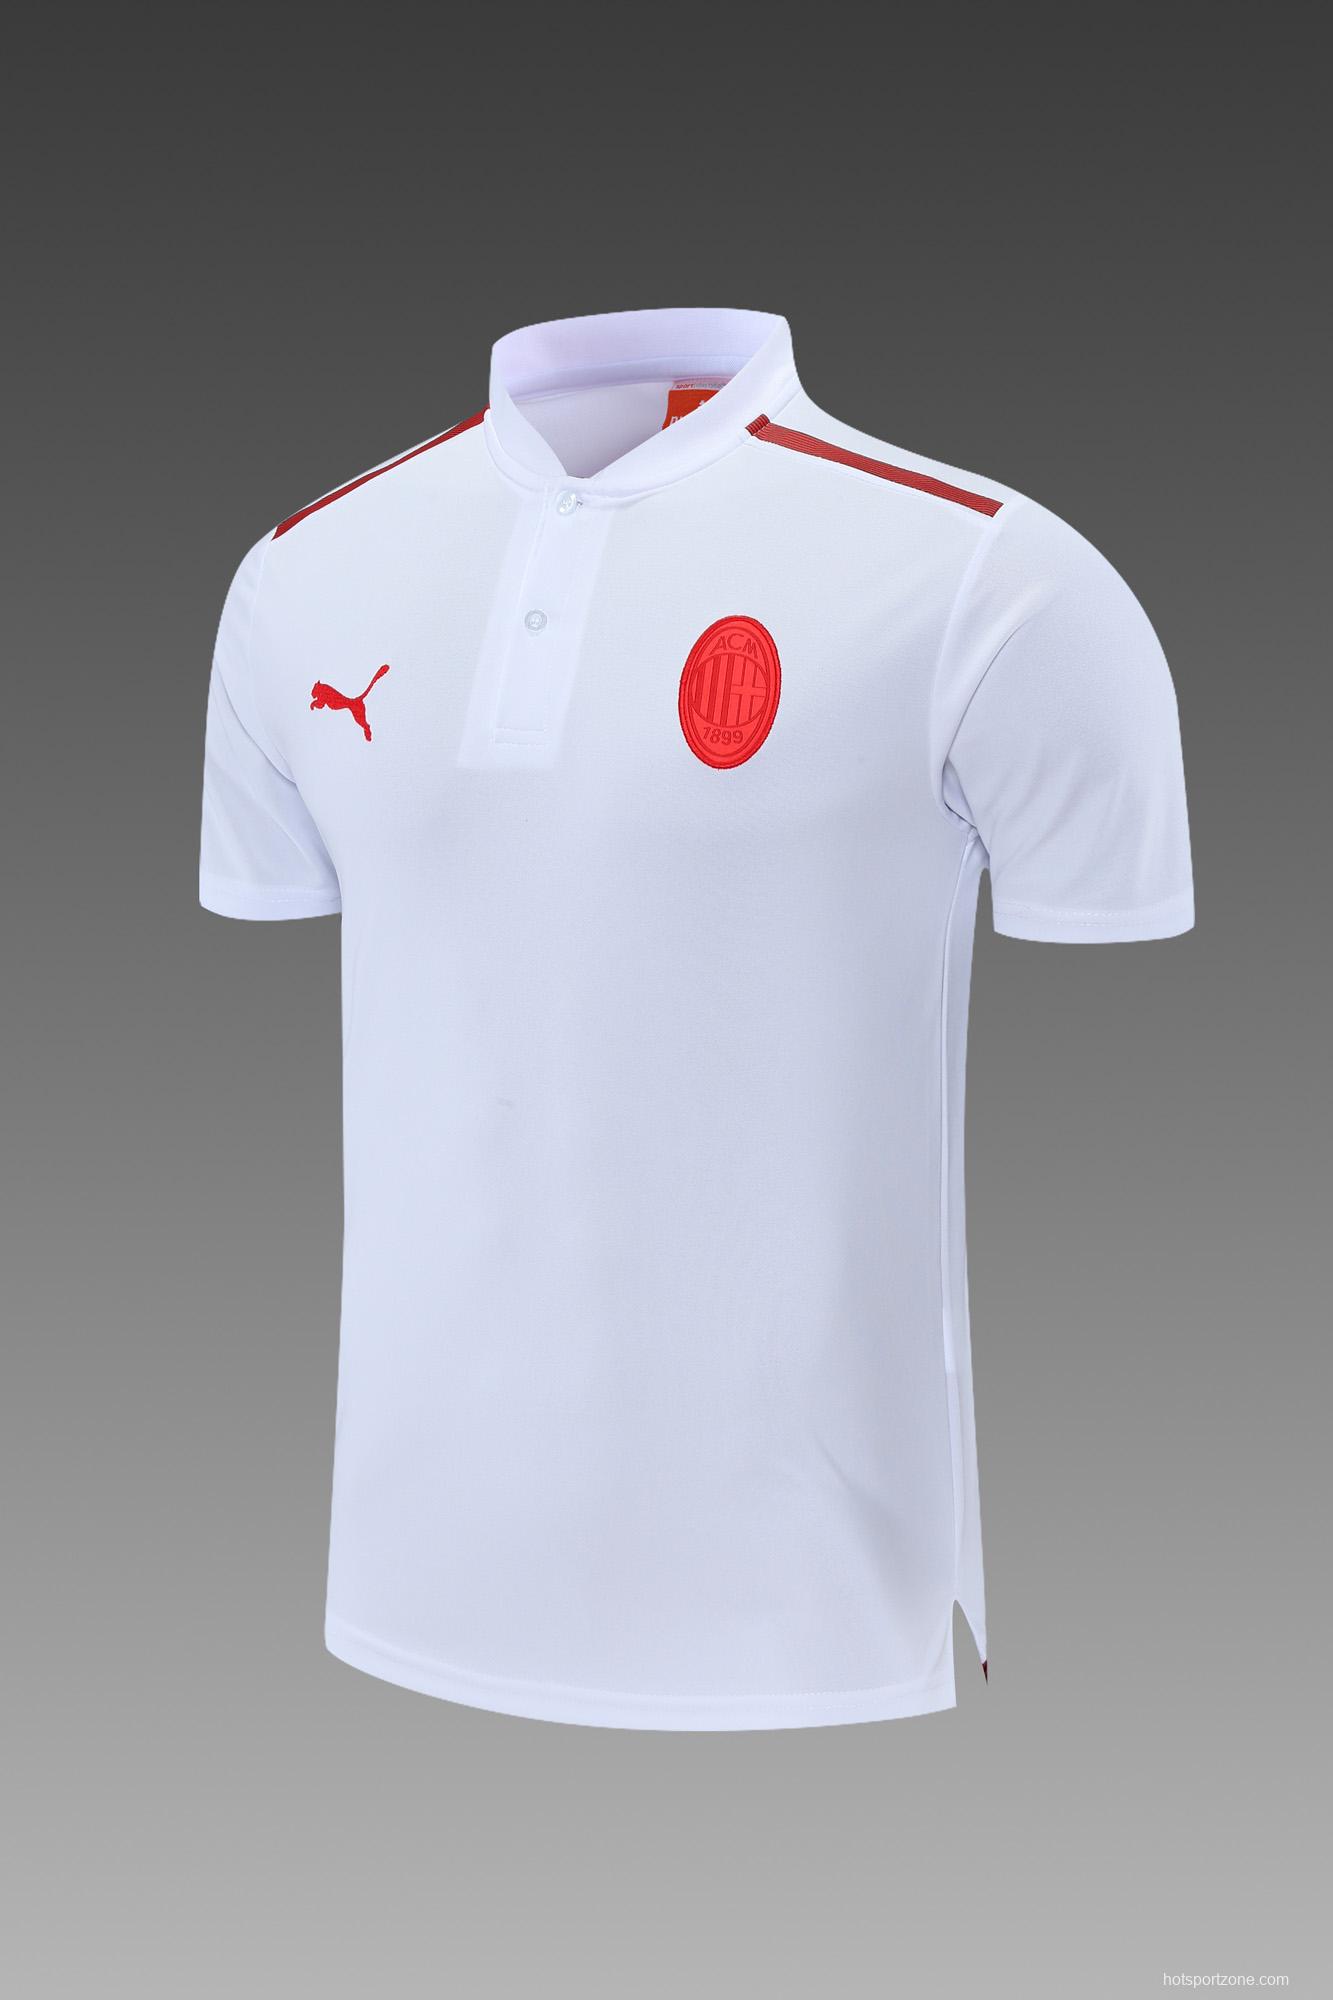 A.C. Milan POLO kit White (not supported to be sold separately)